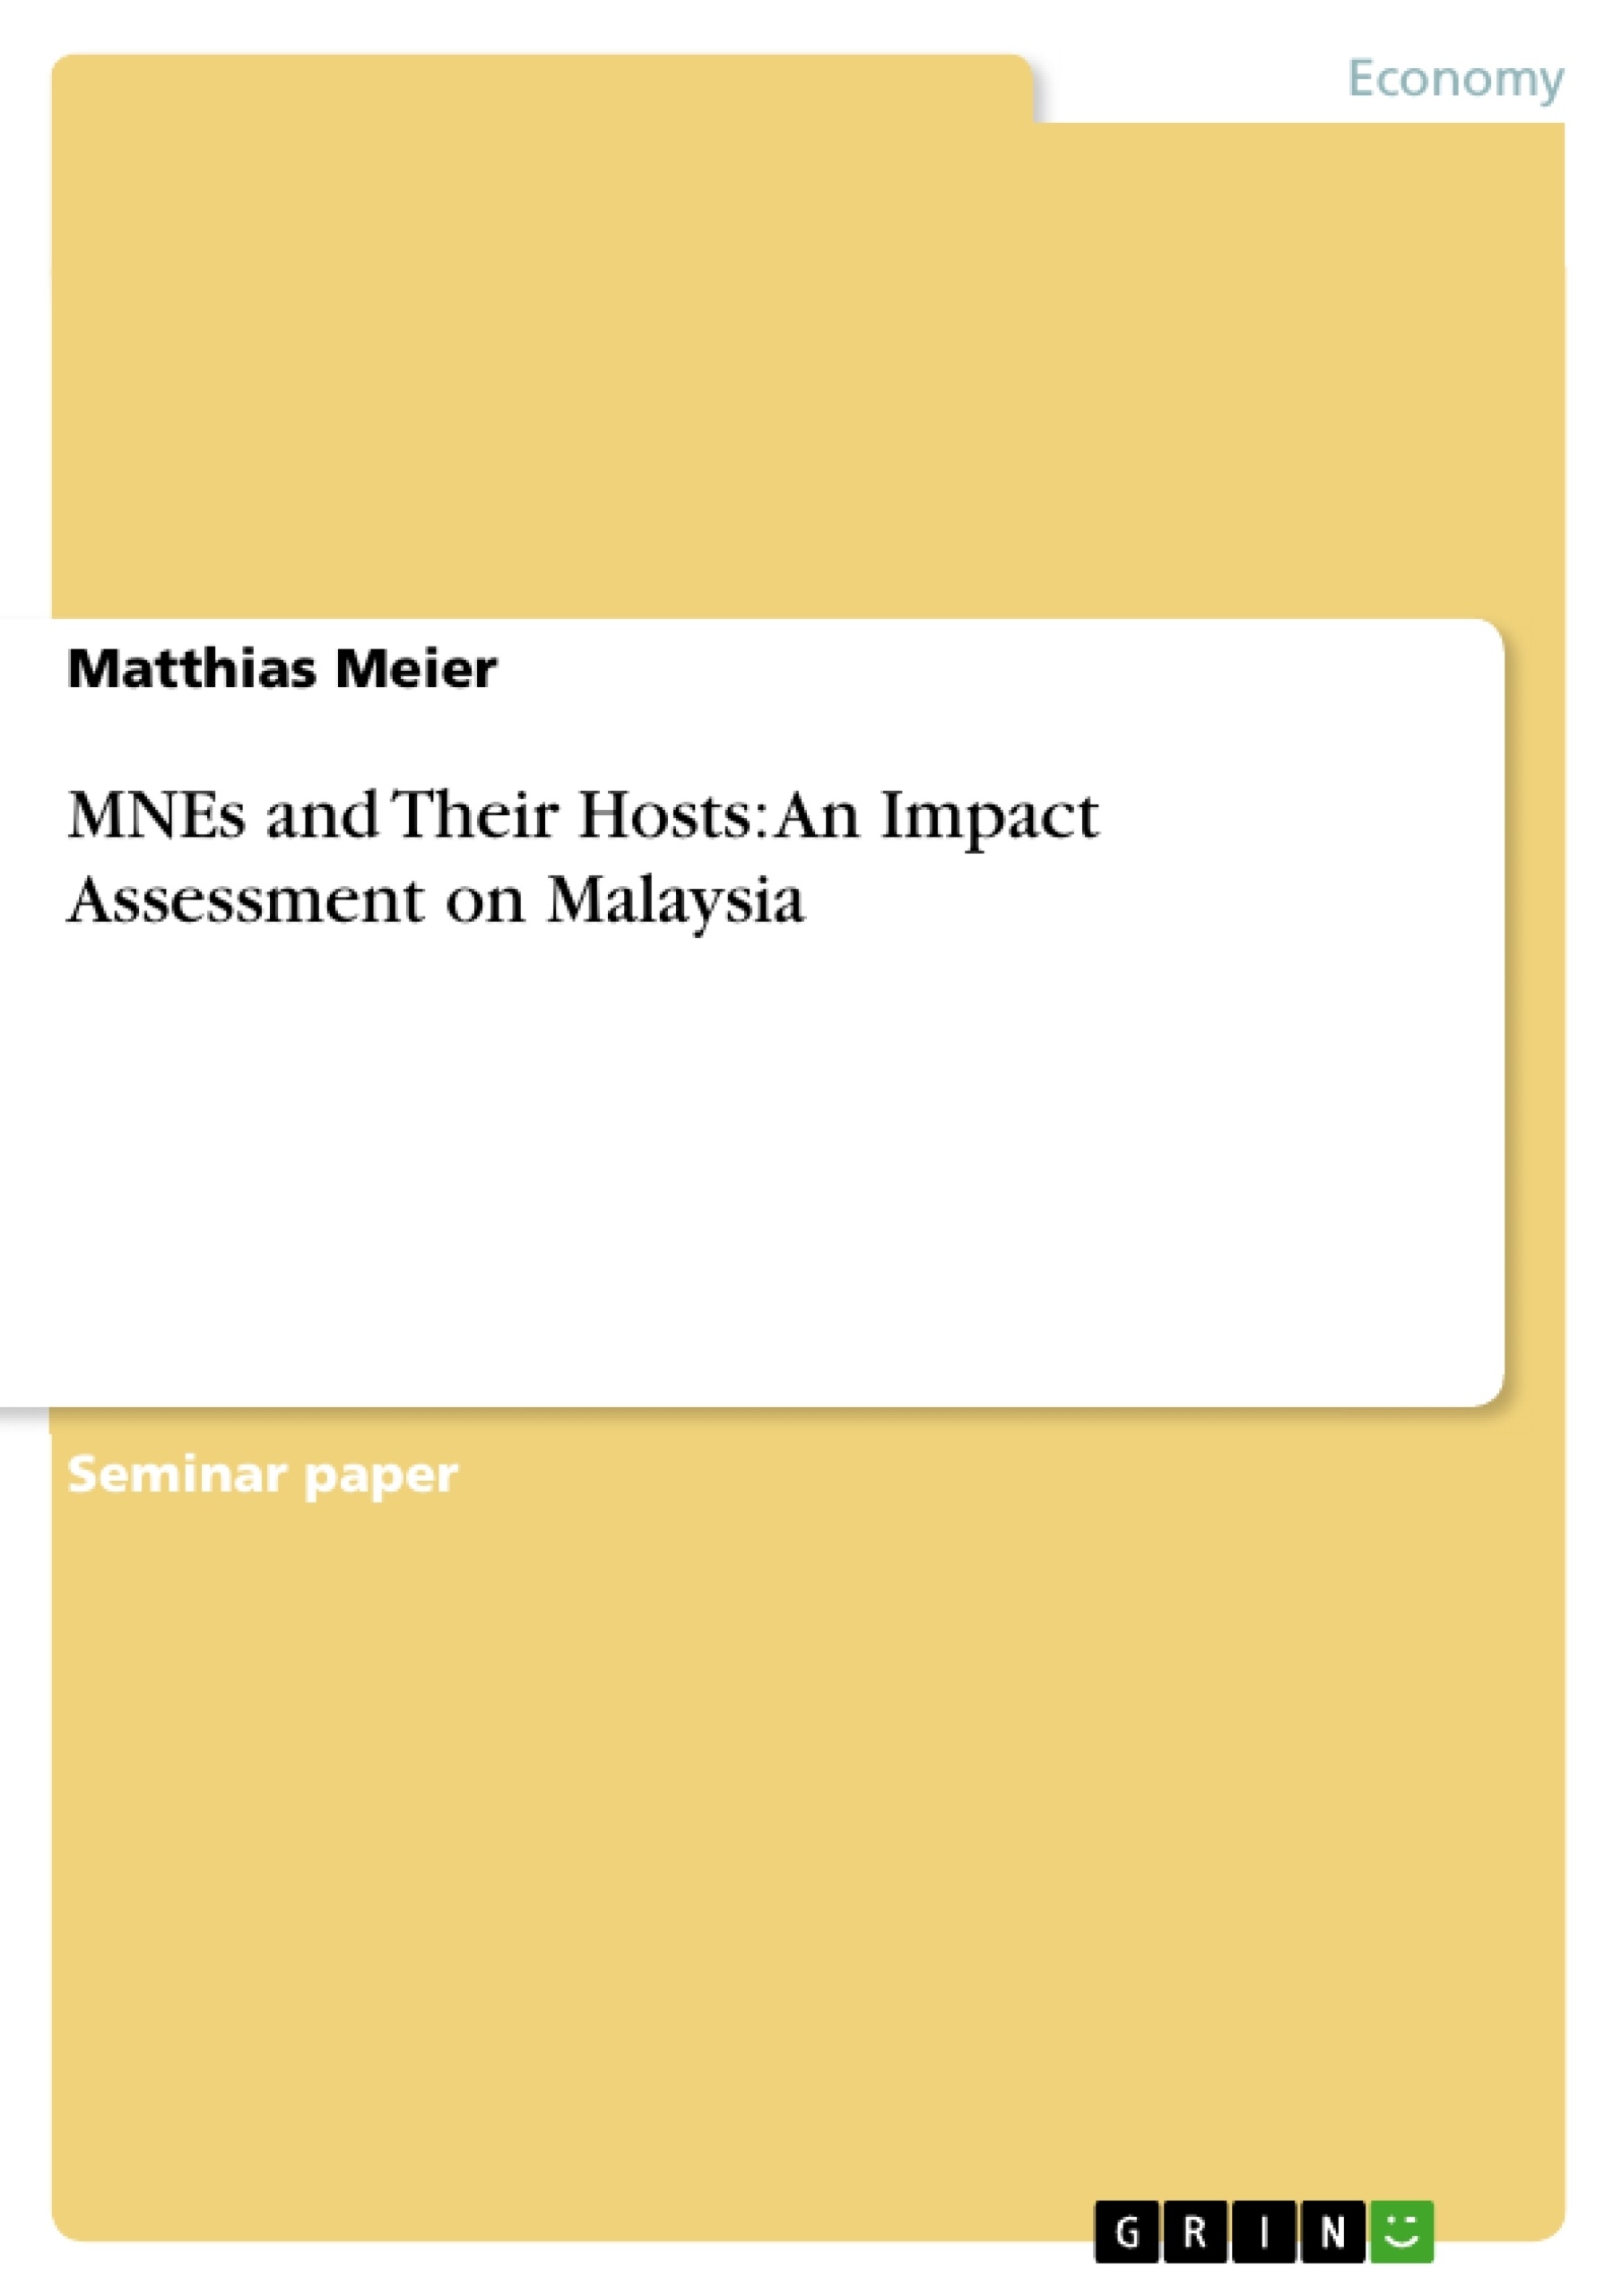 Title: MNEs and Their Hosts: An Impact Assessment on Malaysia